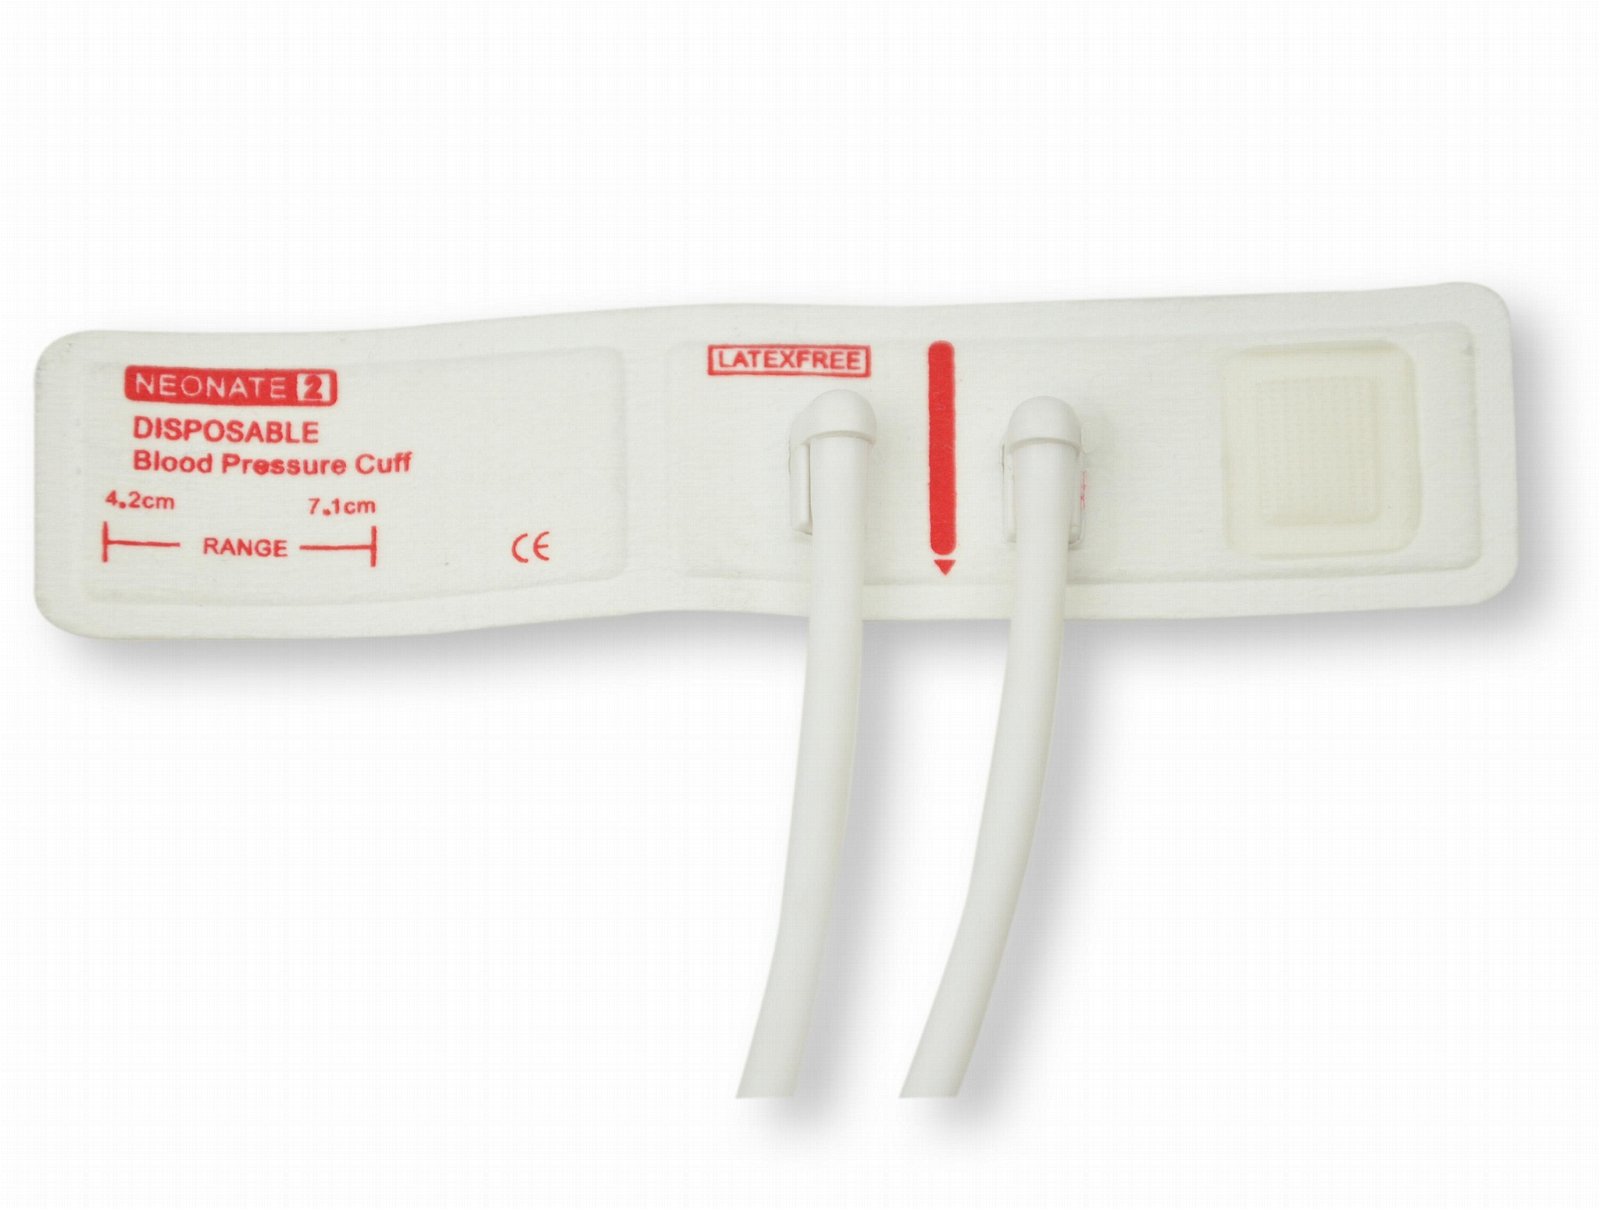 Disposable Blood pressure cuffs for Neonate use, dual tube 2